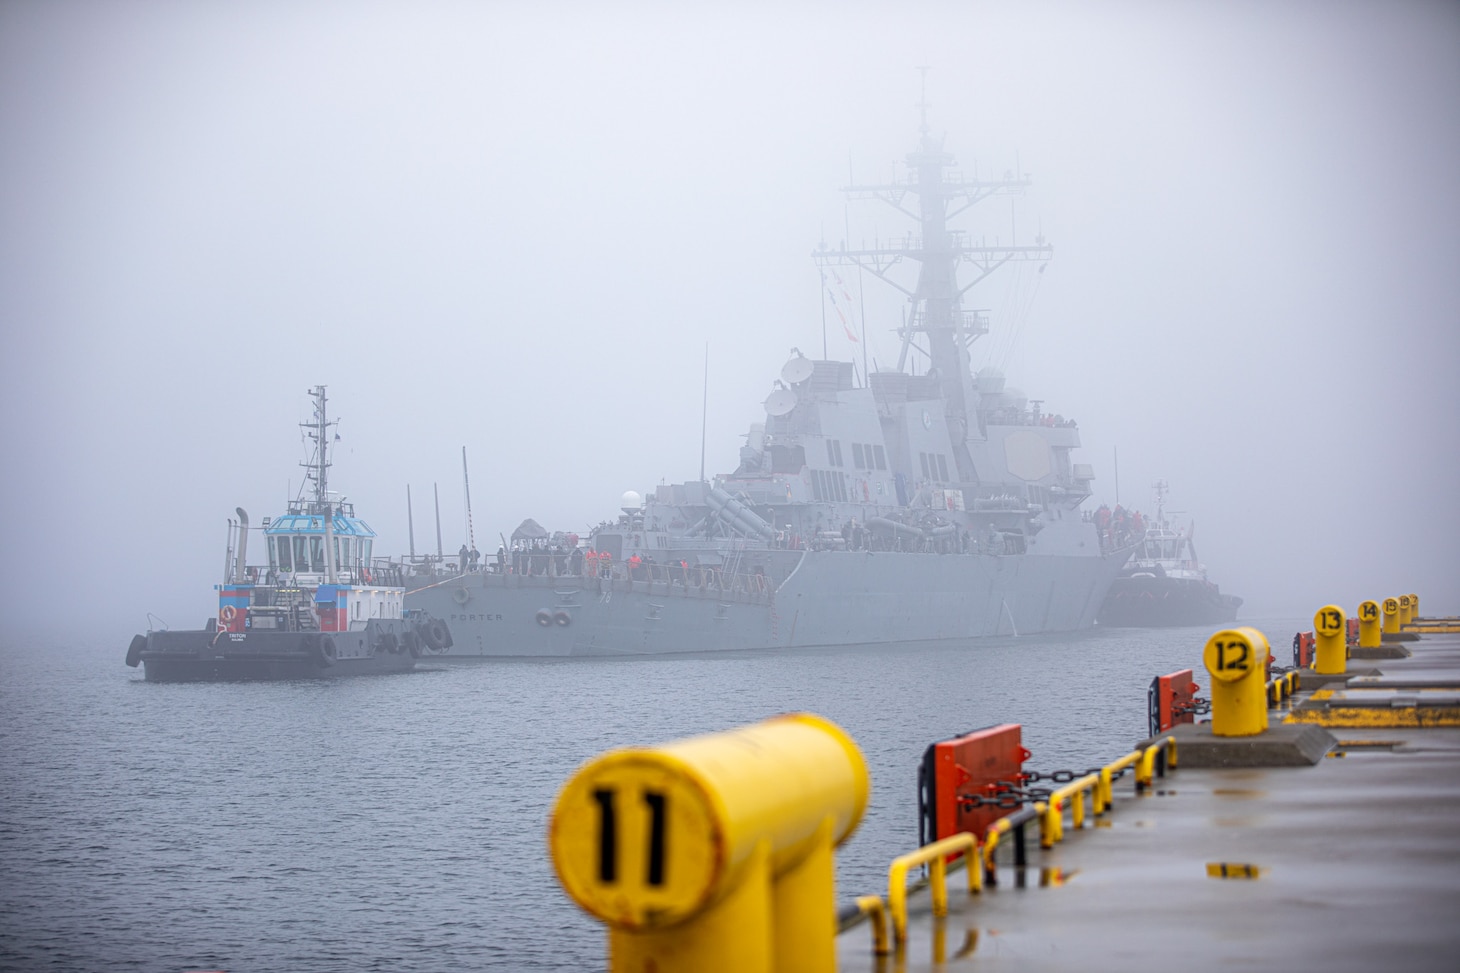 The Arleigh Burke-class guided-missile destroyer USS Porter (DDG 78) arrives in Tallinn, Estonia, March 20, 2023 for a scheduled port visit. Porter is on a scheduled deployment in the U.S. Naval Forces Europe area of operations, employed by the U.S. Sixth Fleet to defend U.S., allied and partner interests.